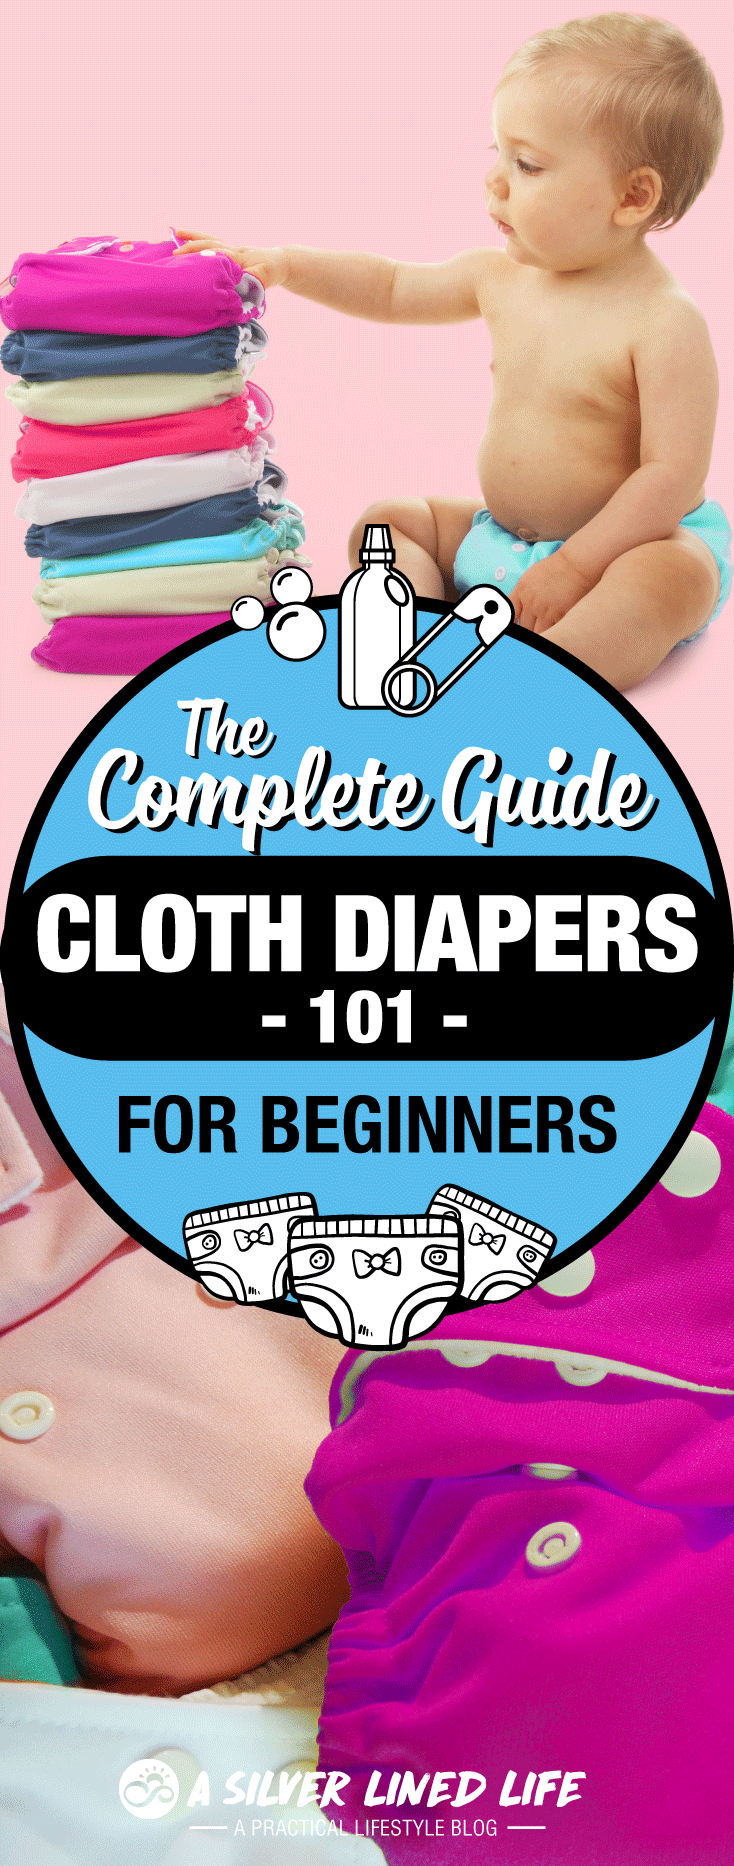 How to Cloth Diaper: The Cloth Diapering Checklist